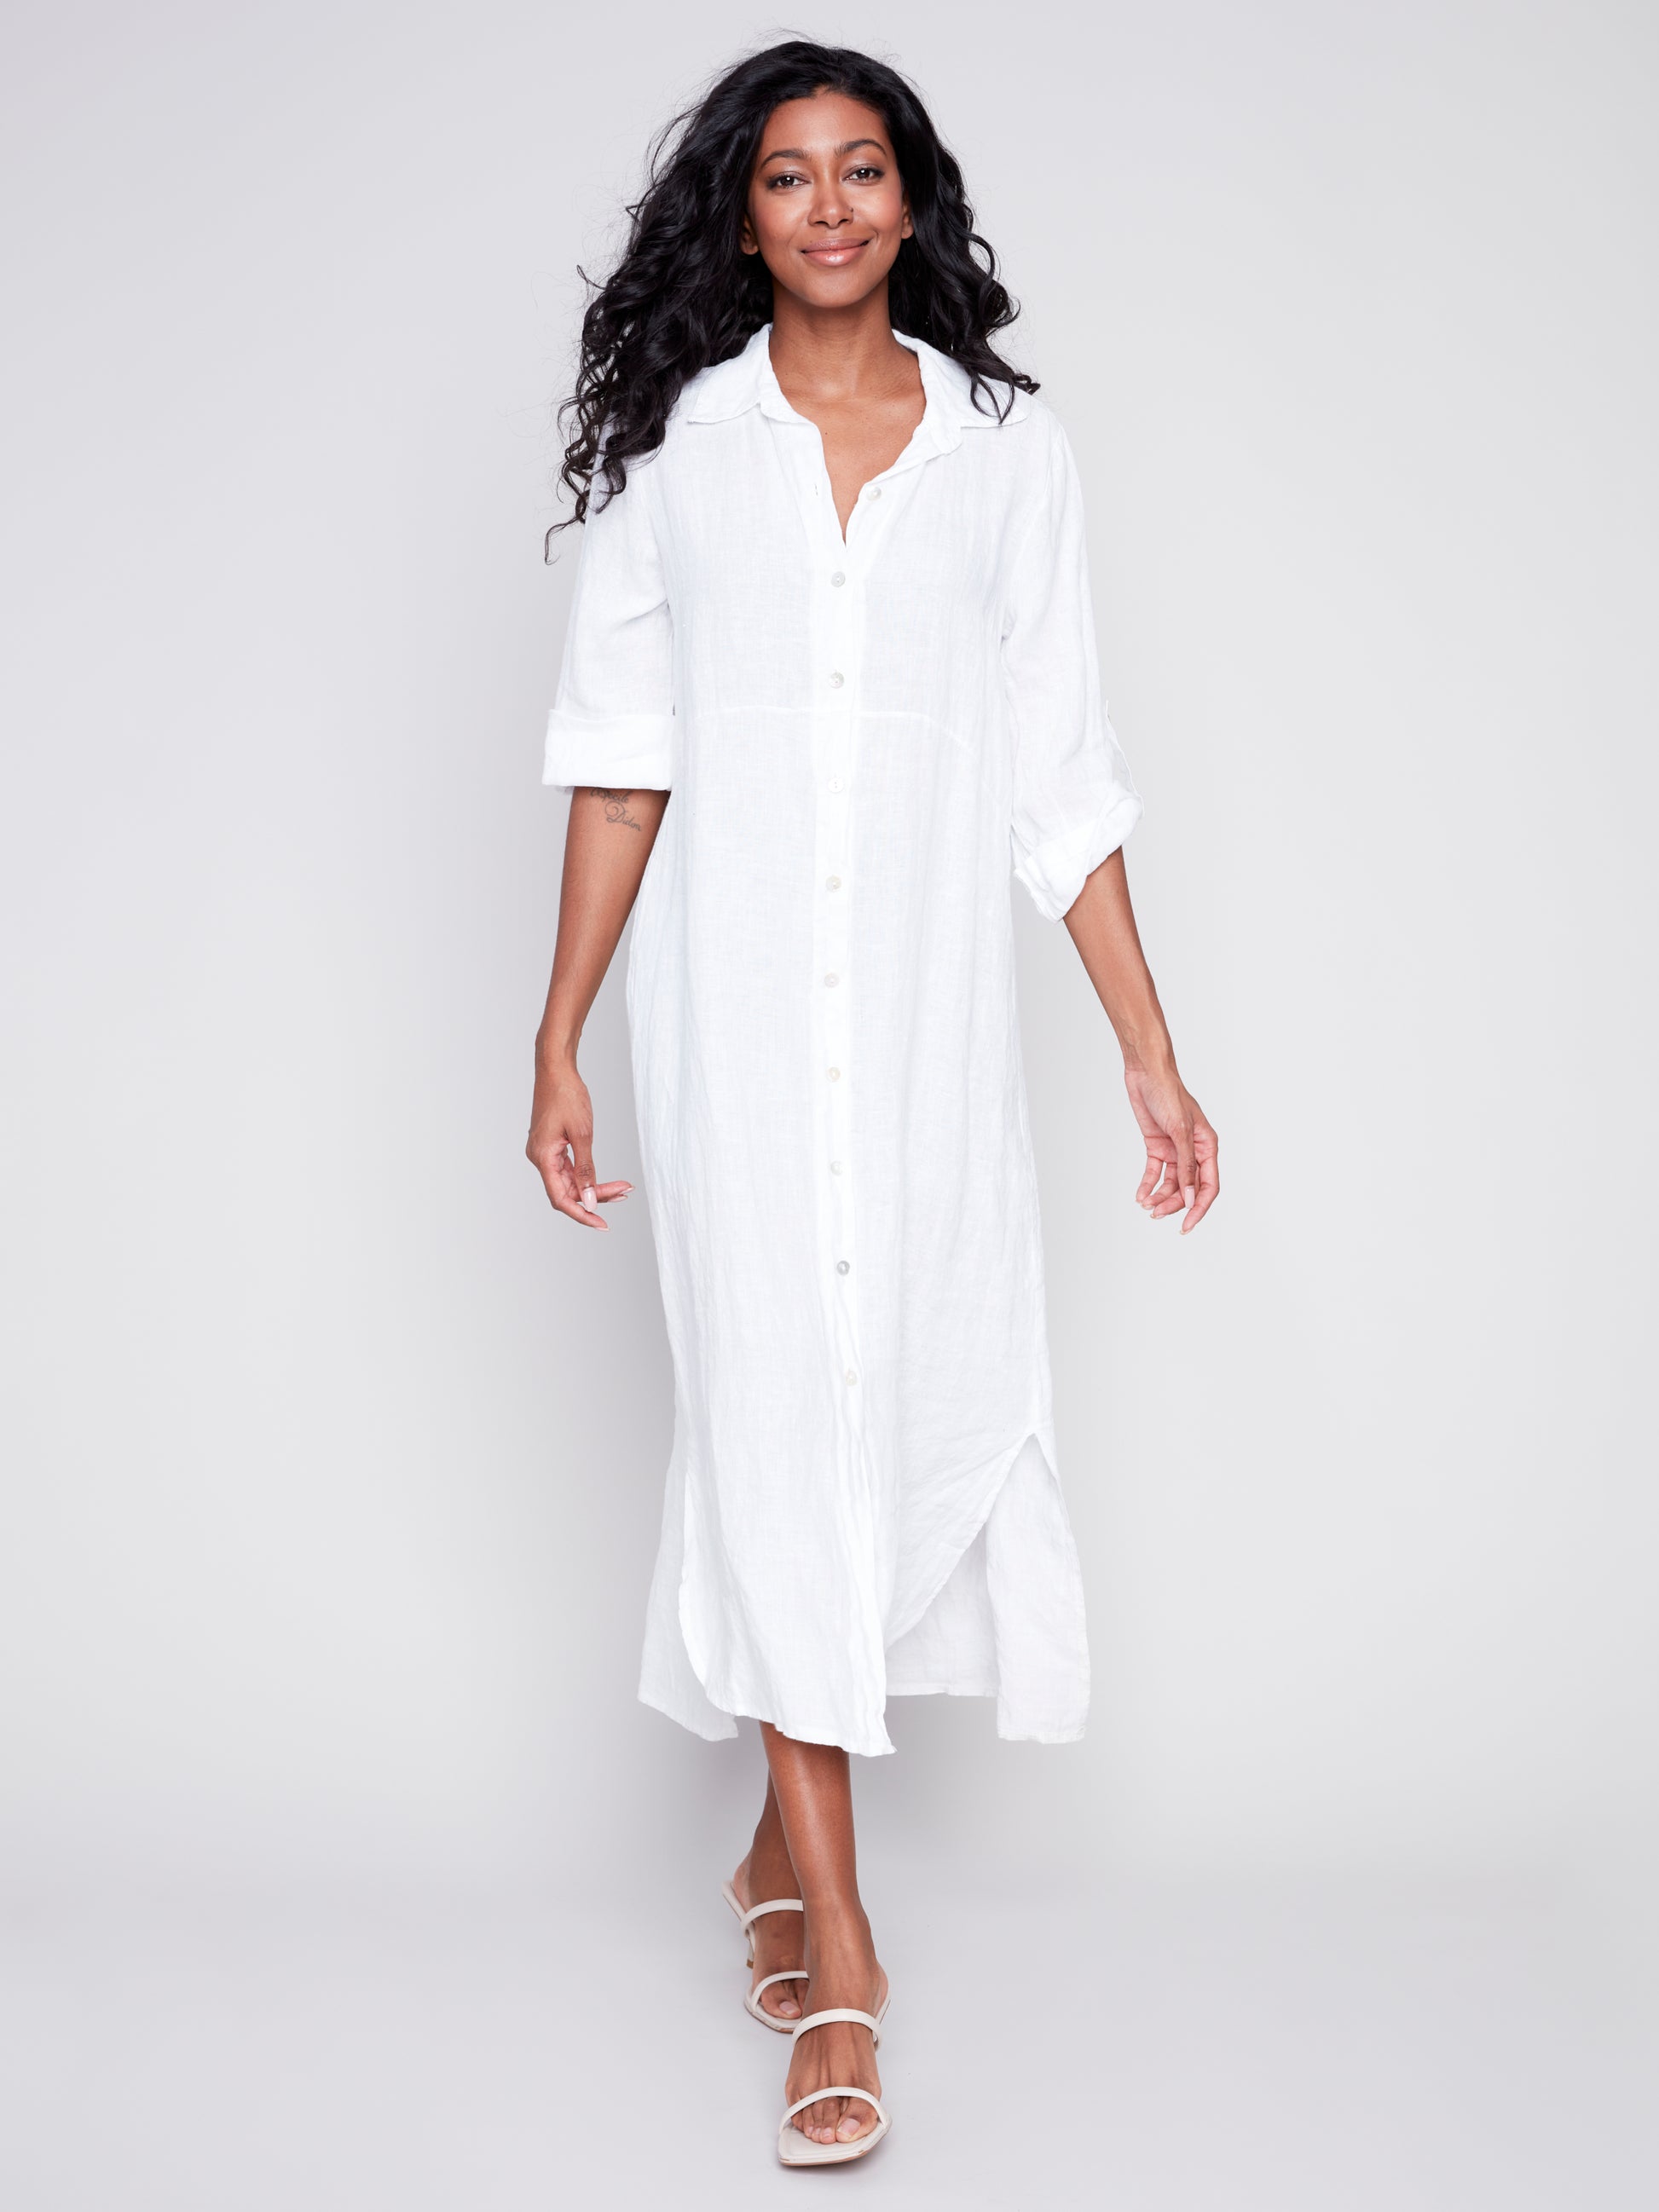 The model is wearing a white Charlie B duster with rolled-up sleeves and denim shorts.